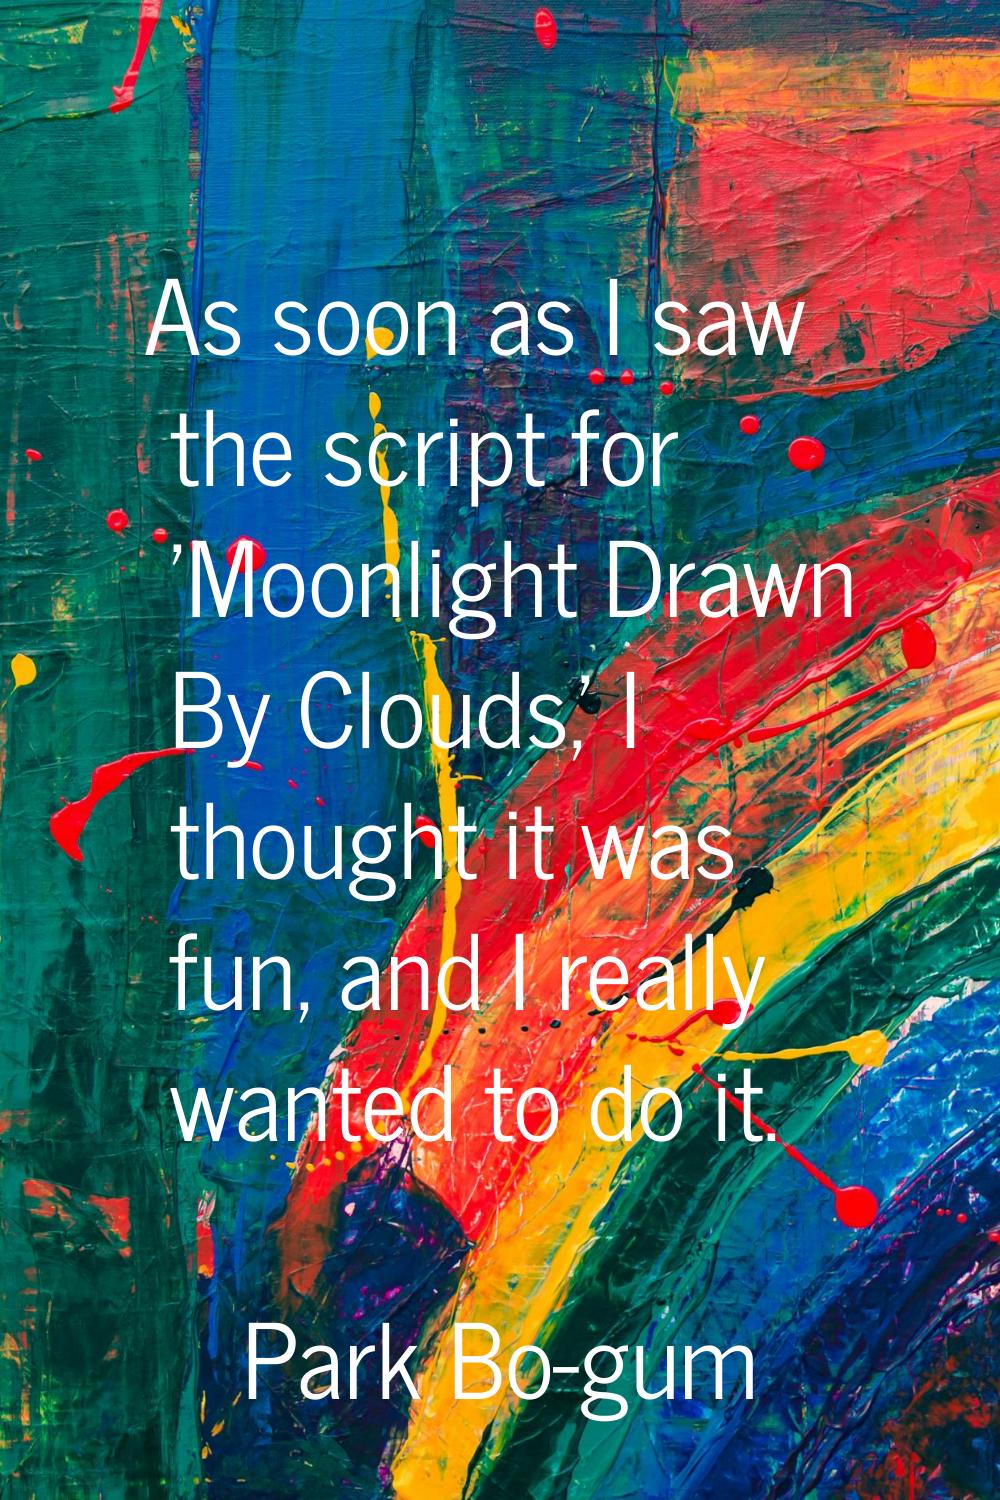 As soon as I saw the script for 'Moonlight Drawn By Clouds,' I thought it was fun, and I really wan